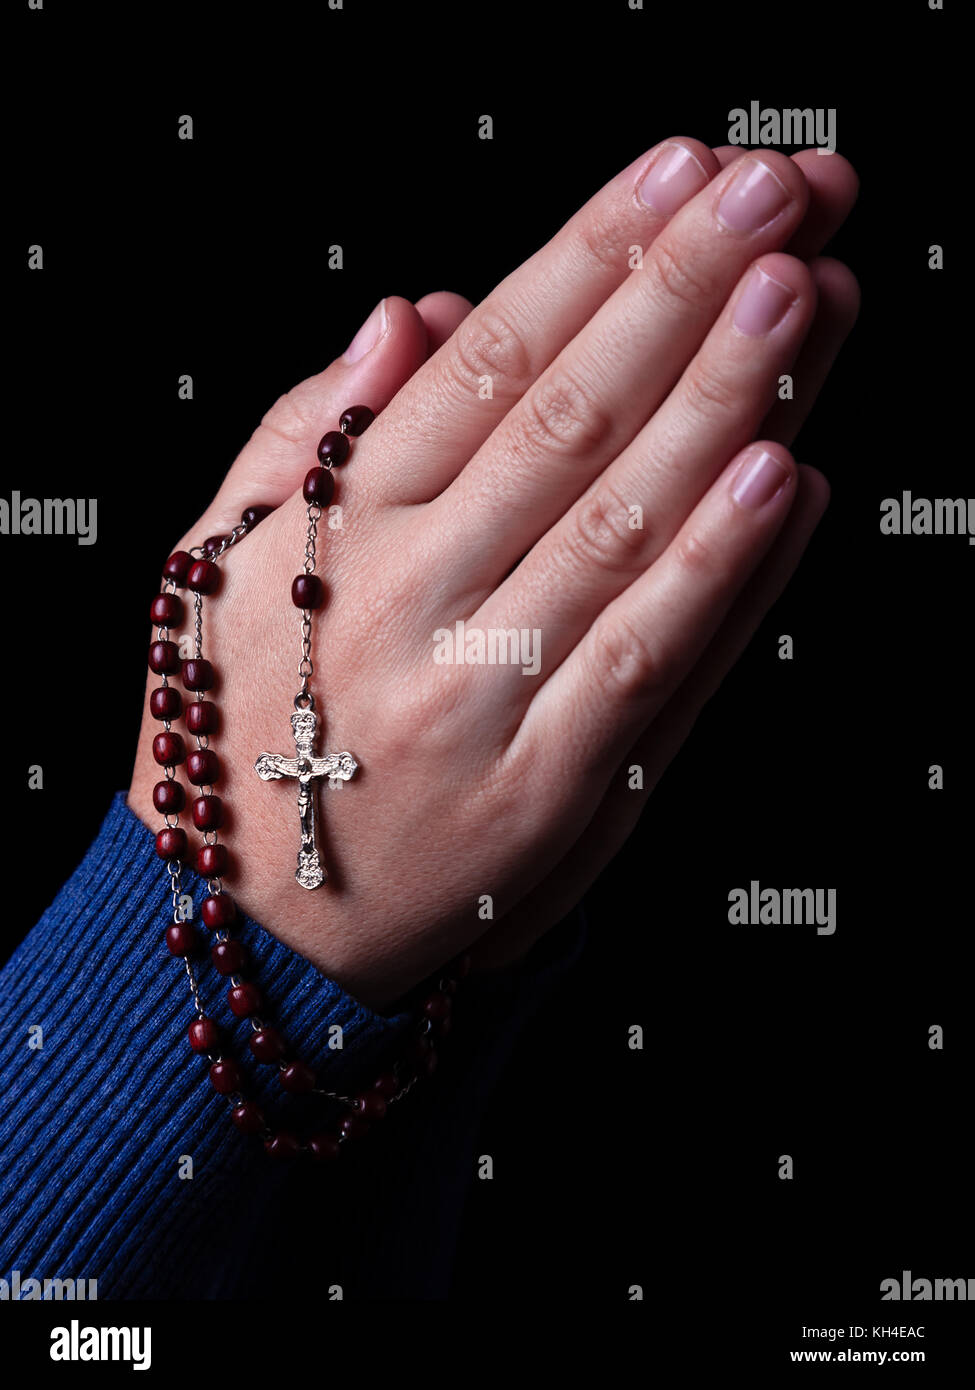 Female hands praying holding a rosary with Jesus Christ in the cross or Crucifix on black background. Woman with Christian Catholic hand faith Stock Photo